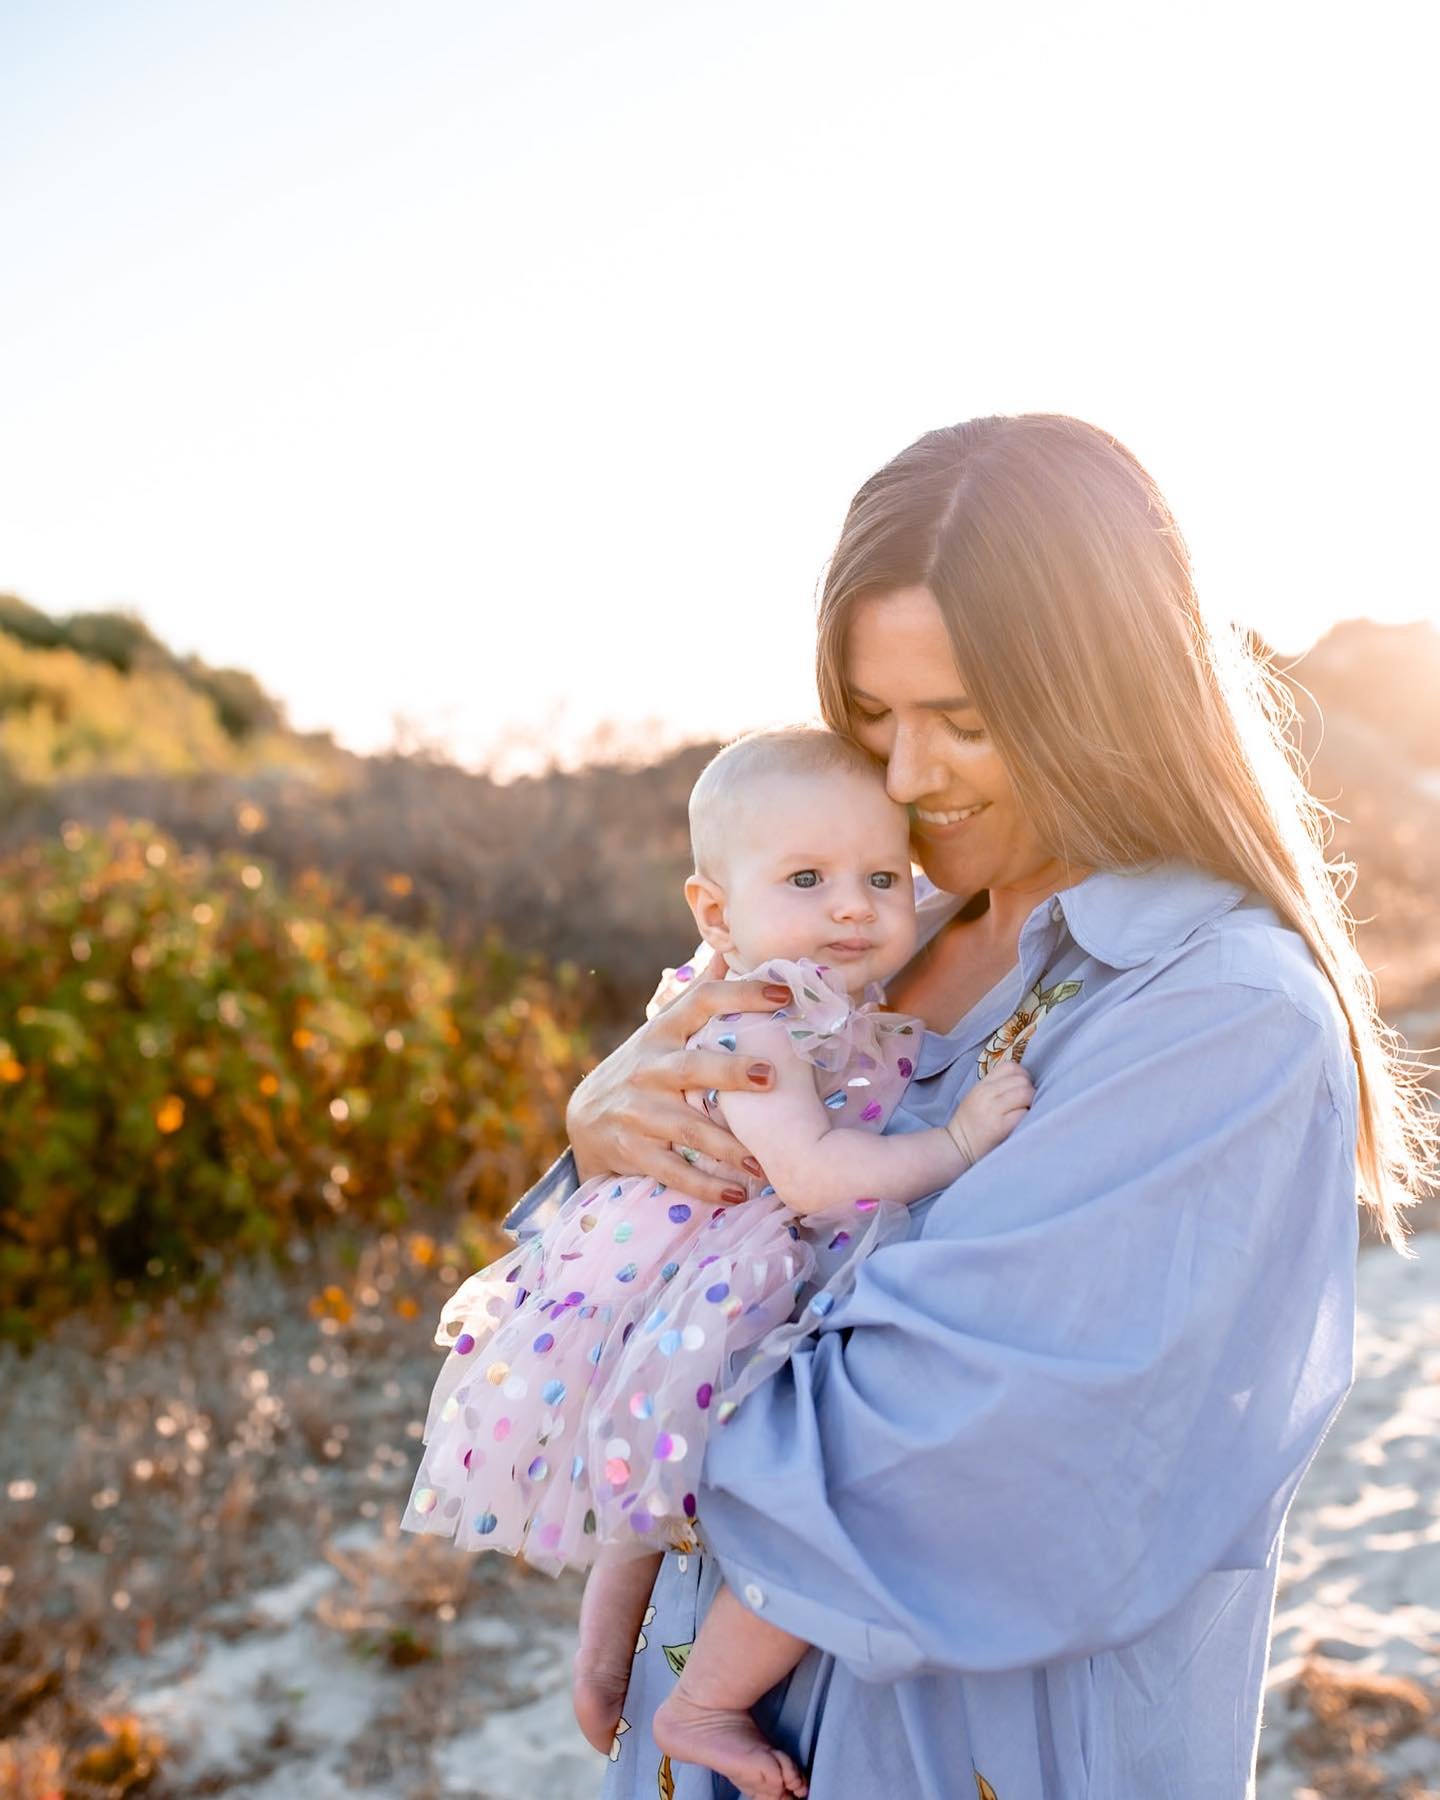 Capturing the magic of golden hour with this beautiful family! If you&rsquo;ve been dreaming about making your own family&rsquo;s sunset memories let&rsquo;s make it happen! Whether it&rsquo;s a playful beach session or a cozy park, I&rsquo;ll ensure